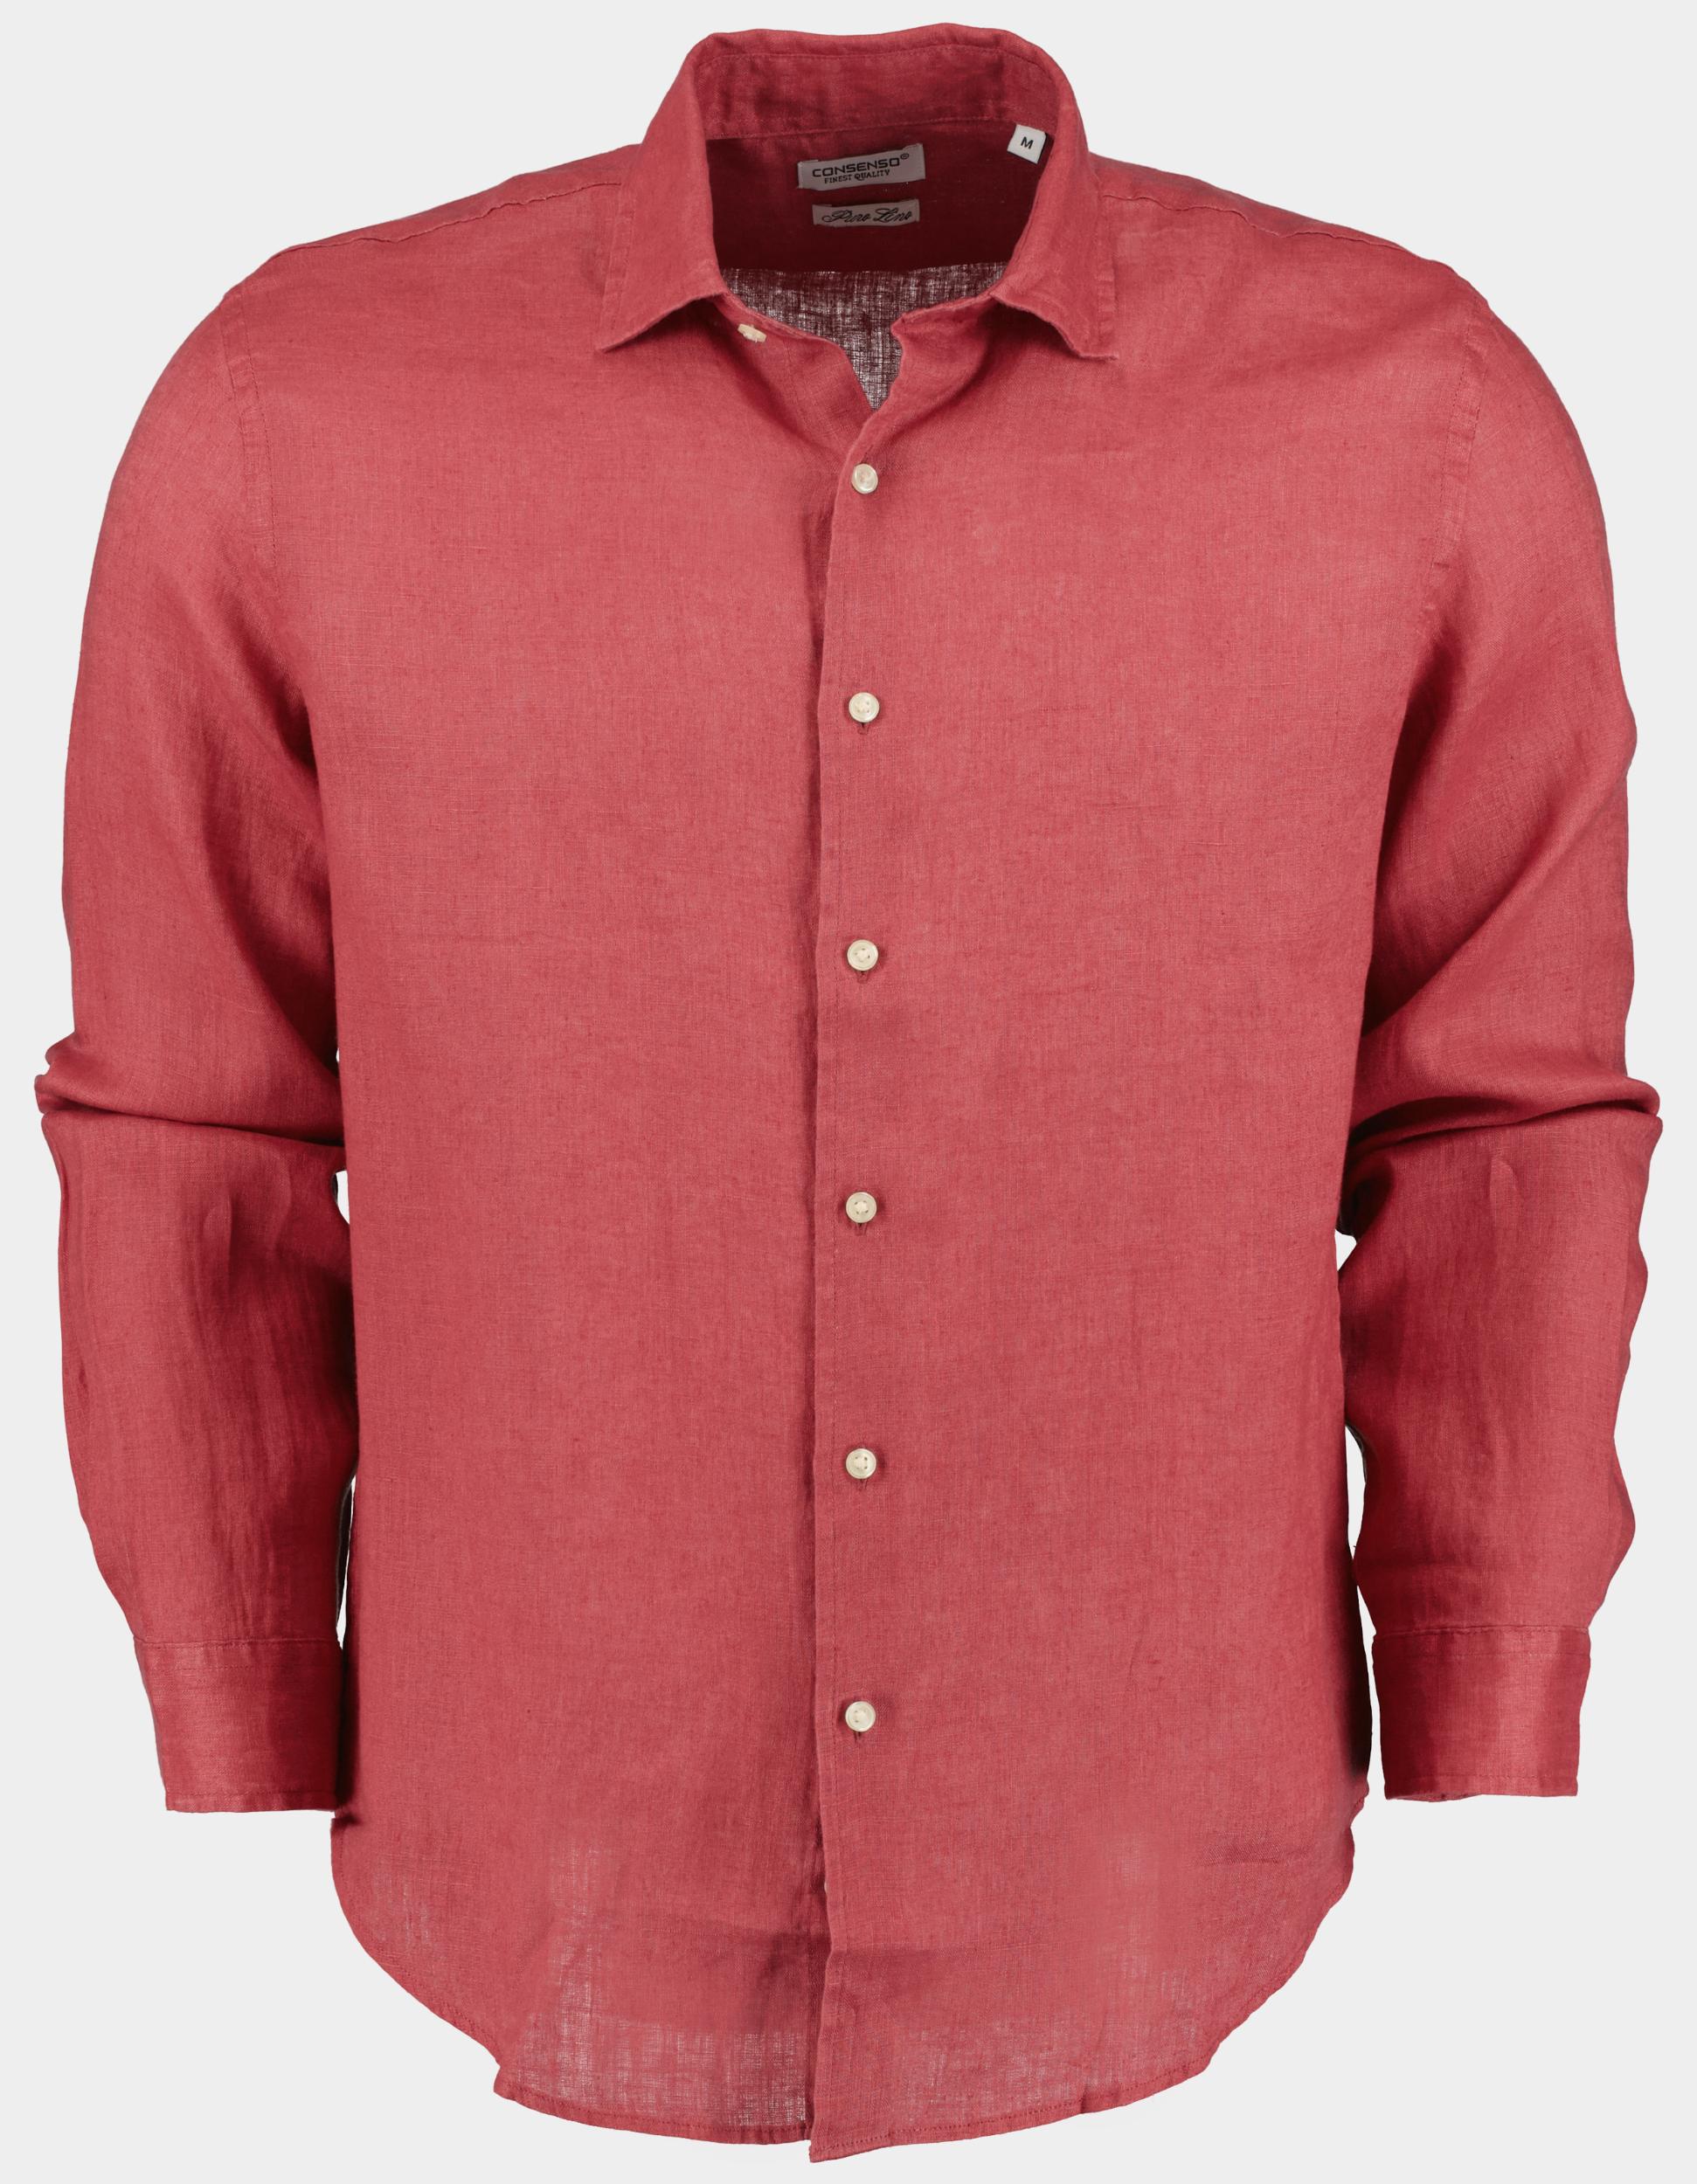 Consenso Casual hemd lange mouw Roze Camicia 9432900/531